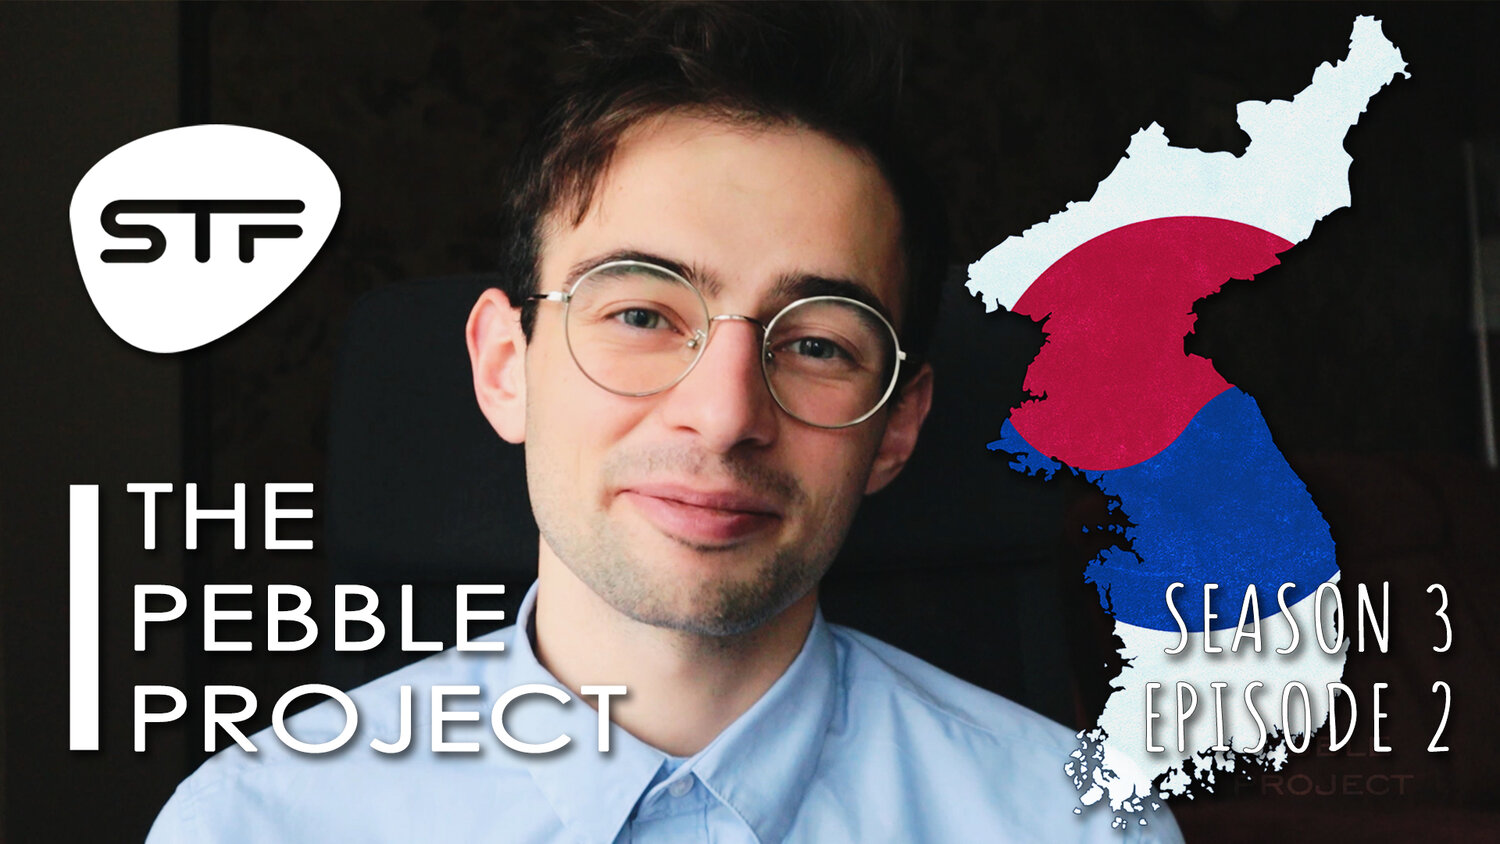 Pebble Project S3 - Episode 2 — STF Europe